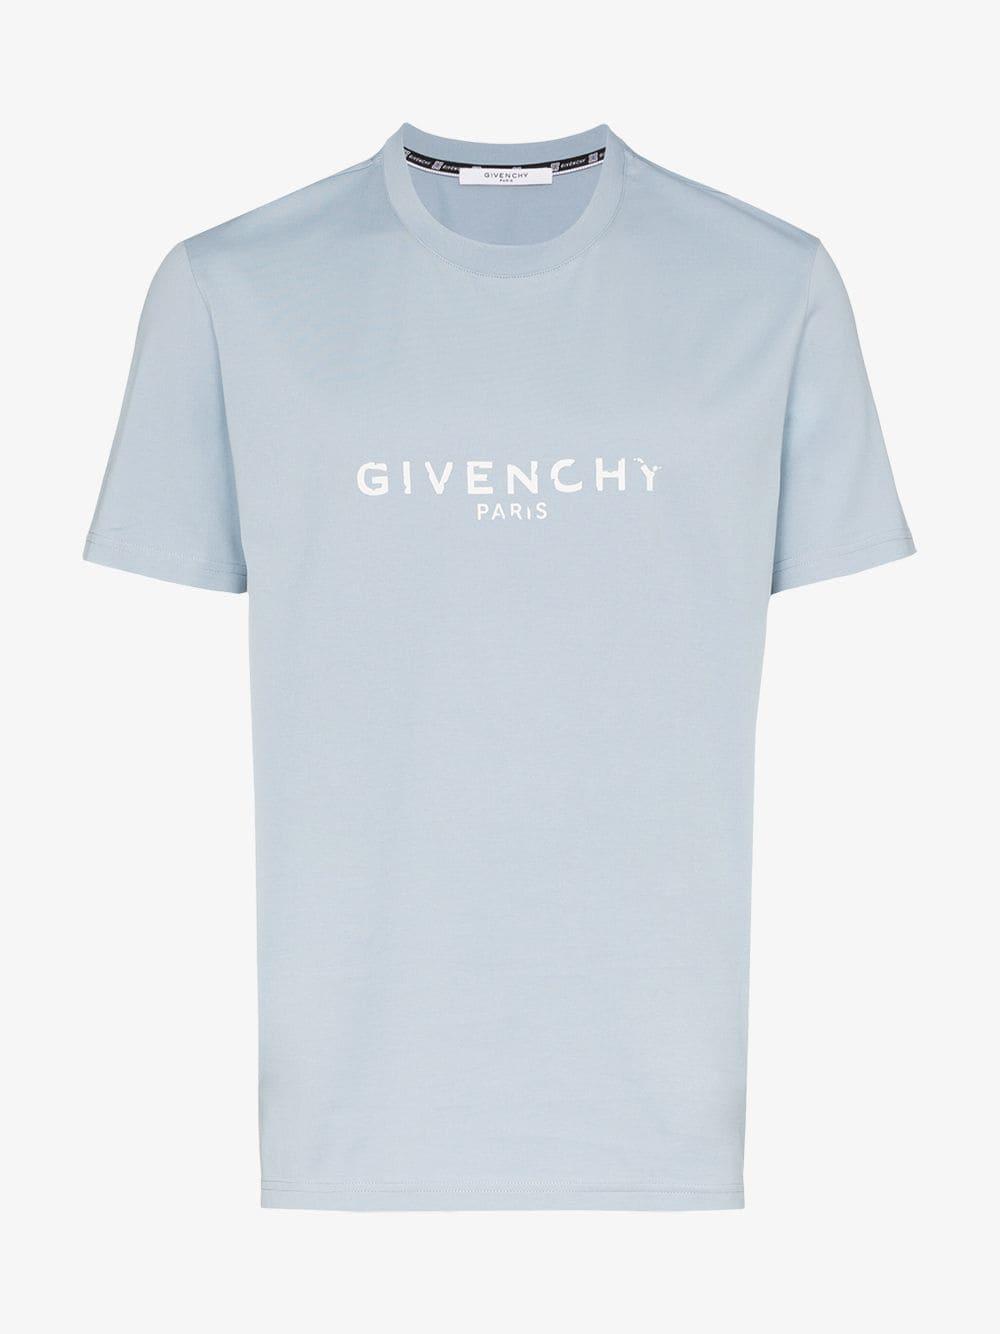 givenchy t shirt baby blue